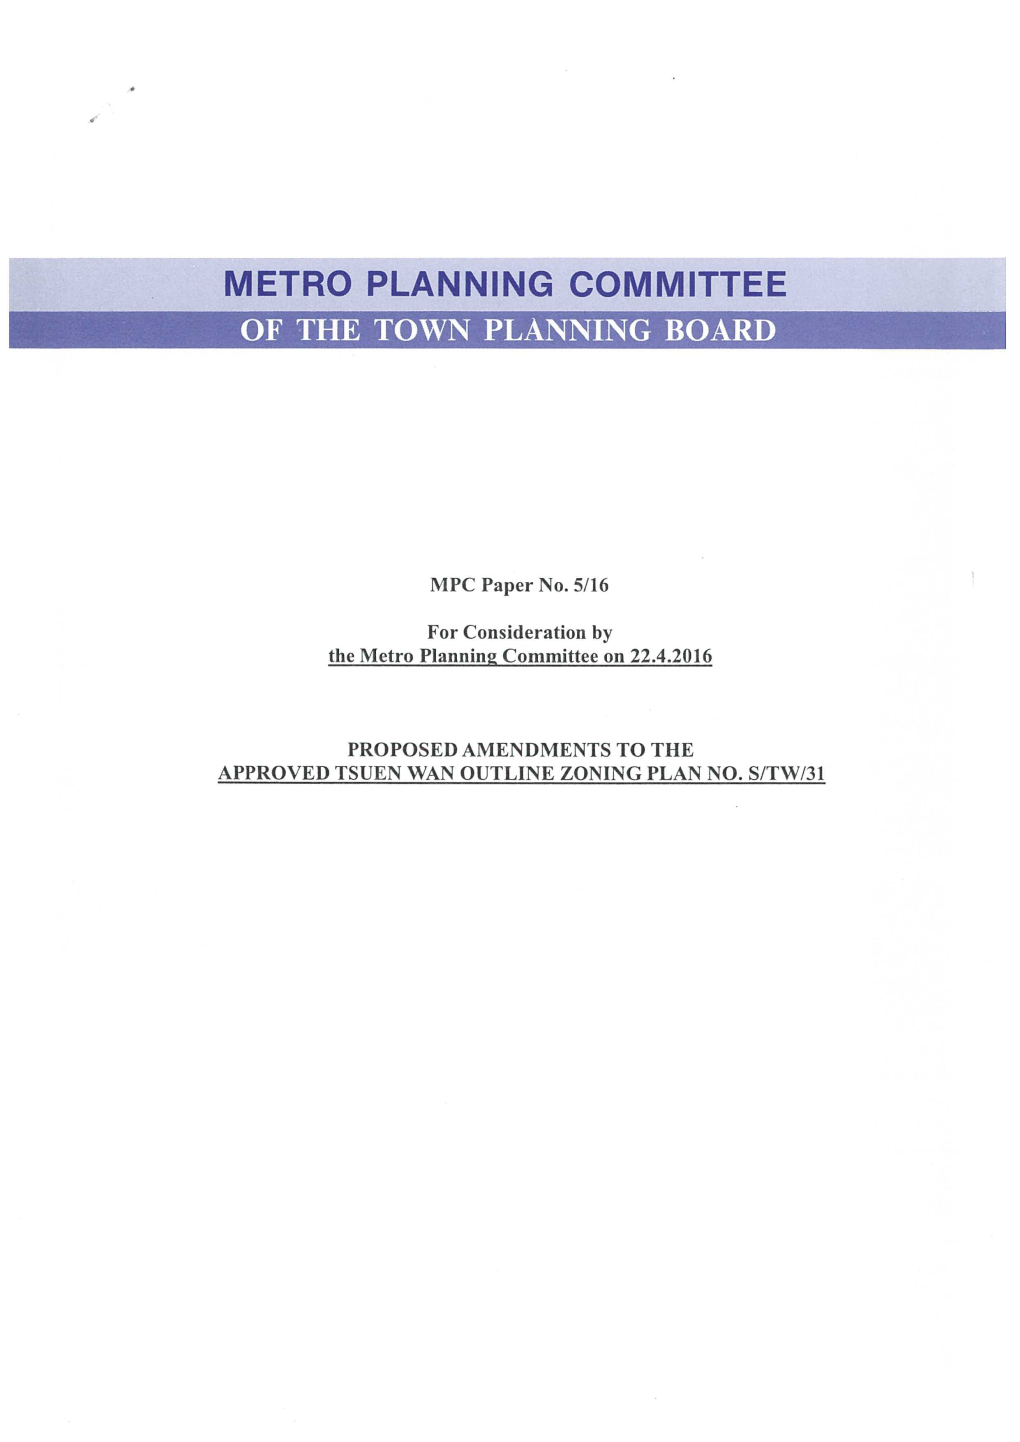 MPC Paper No. 5/16 for Consideration by the Metro Planning Committee on 22.4.2016